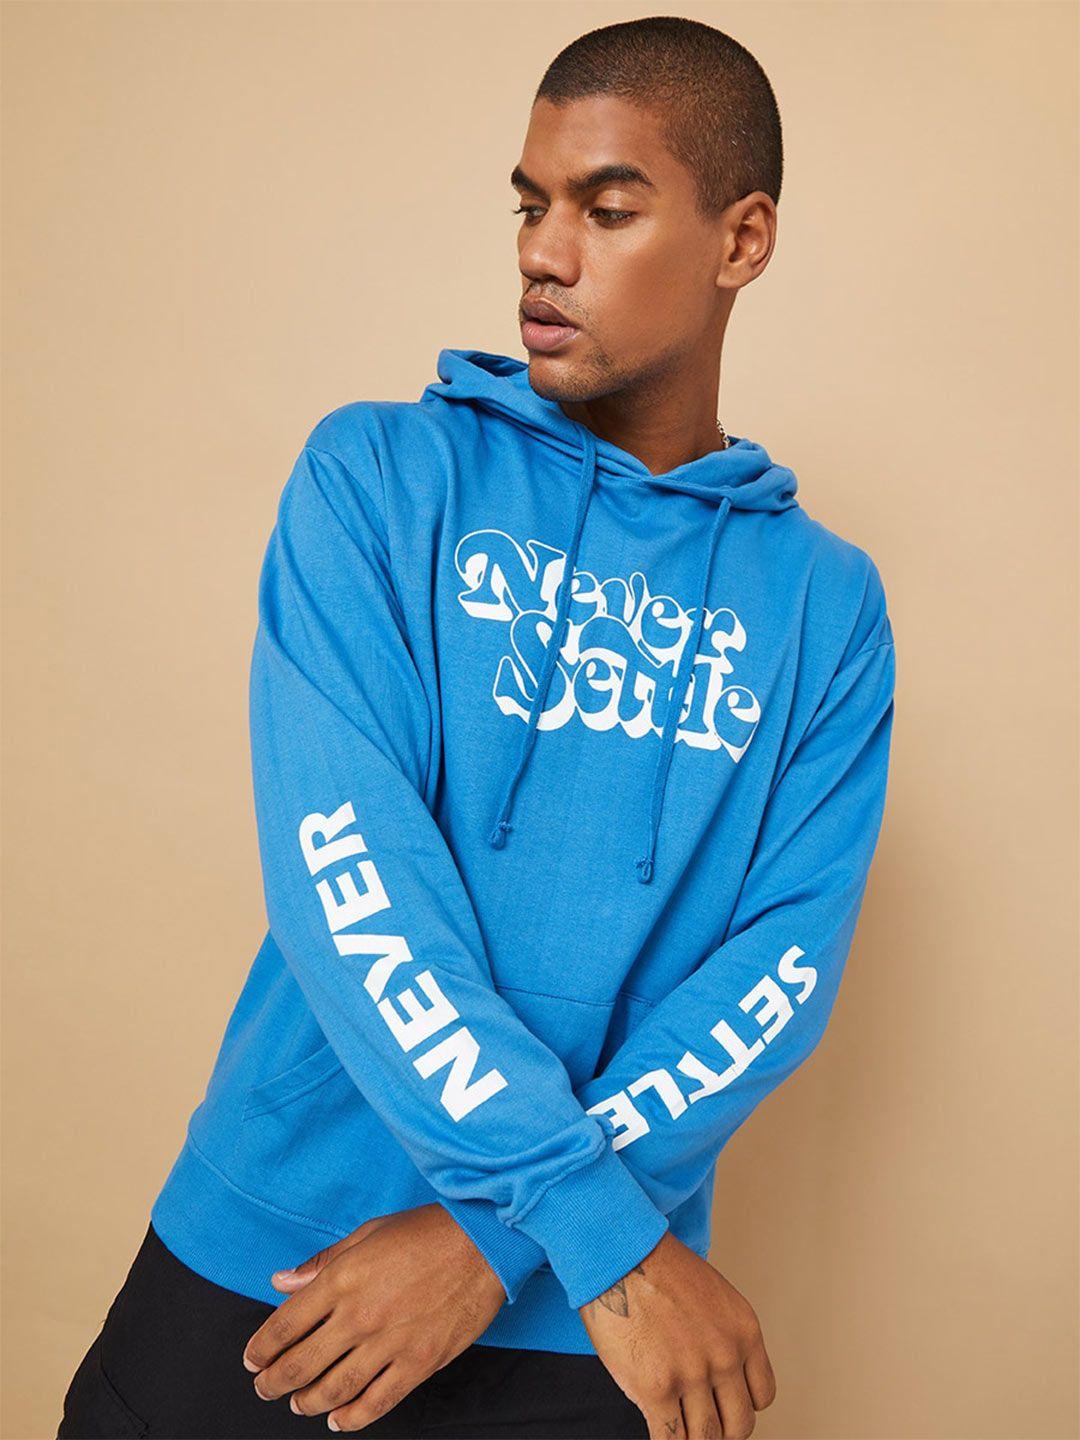 styli placement printed boxy hoodie